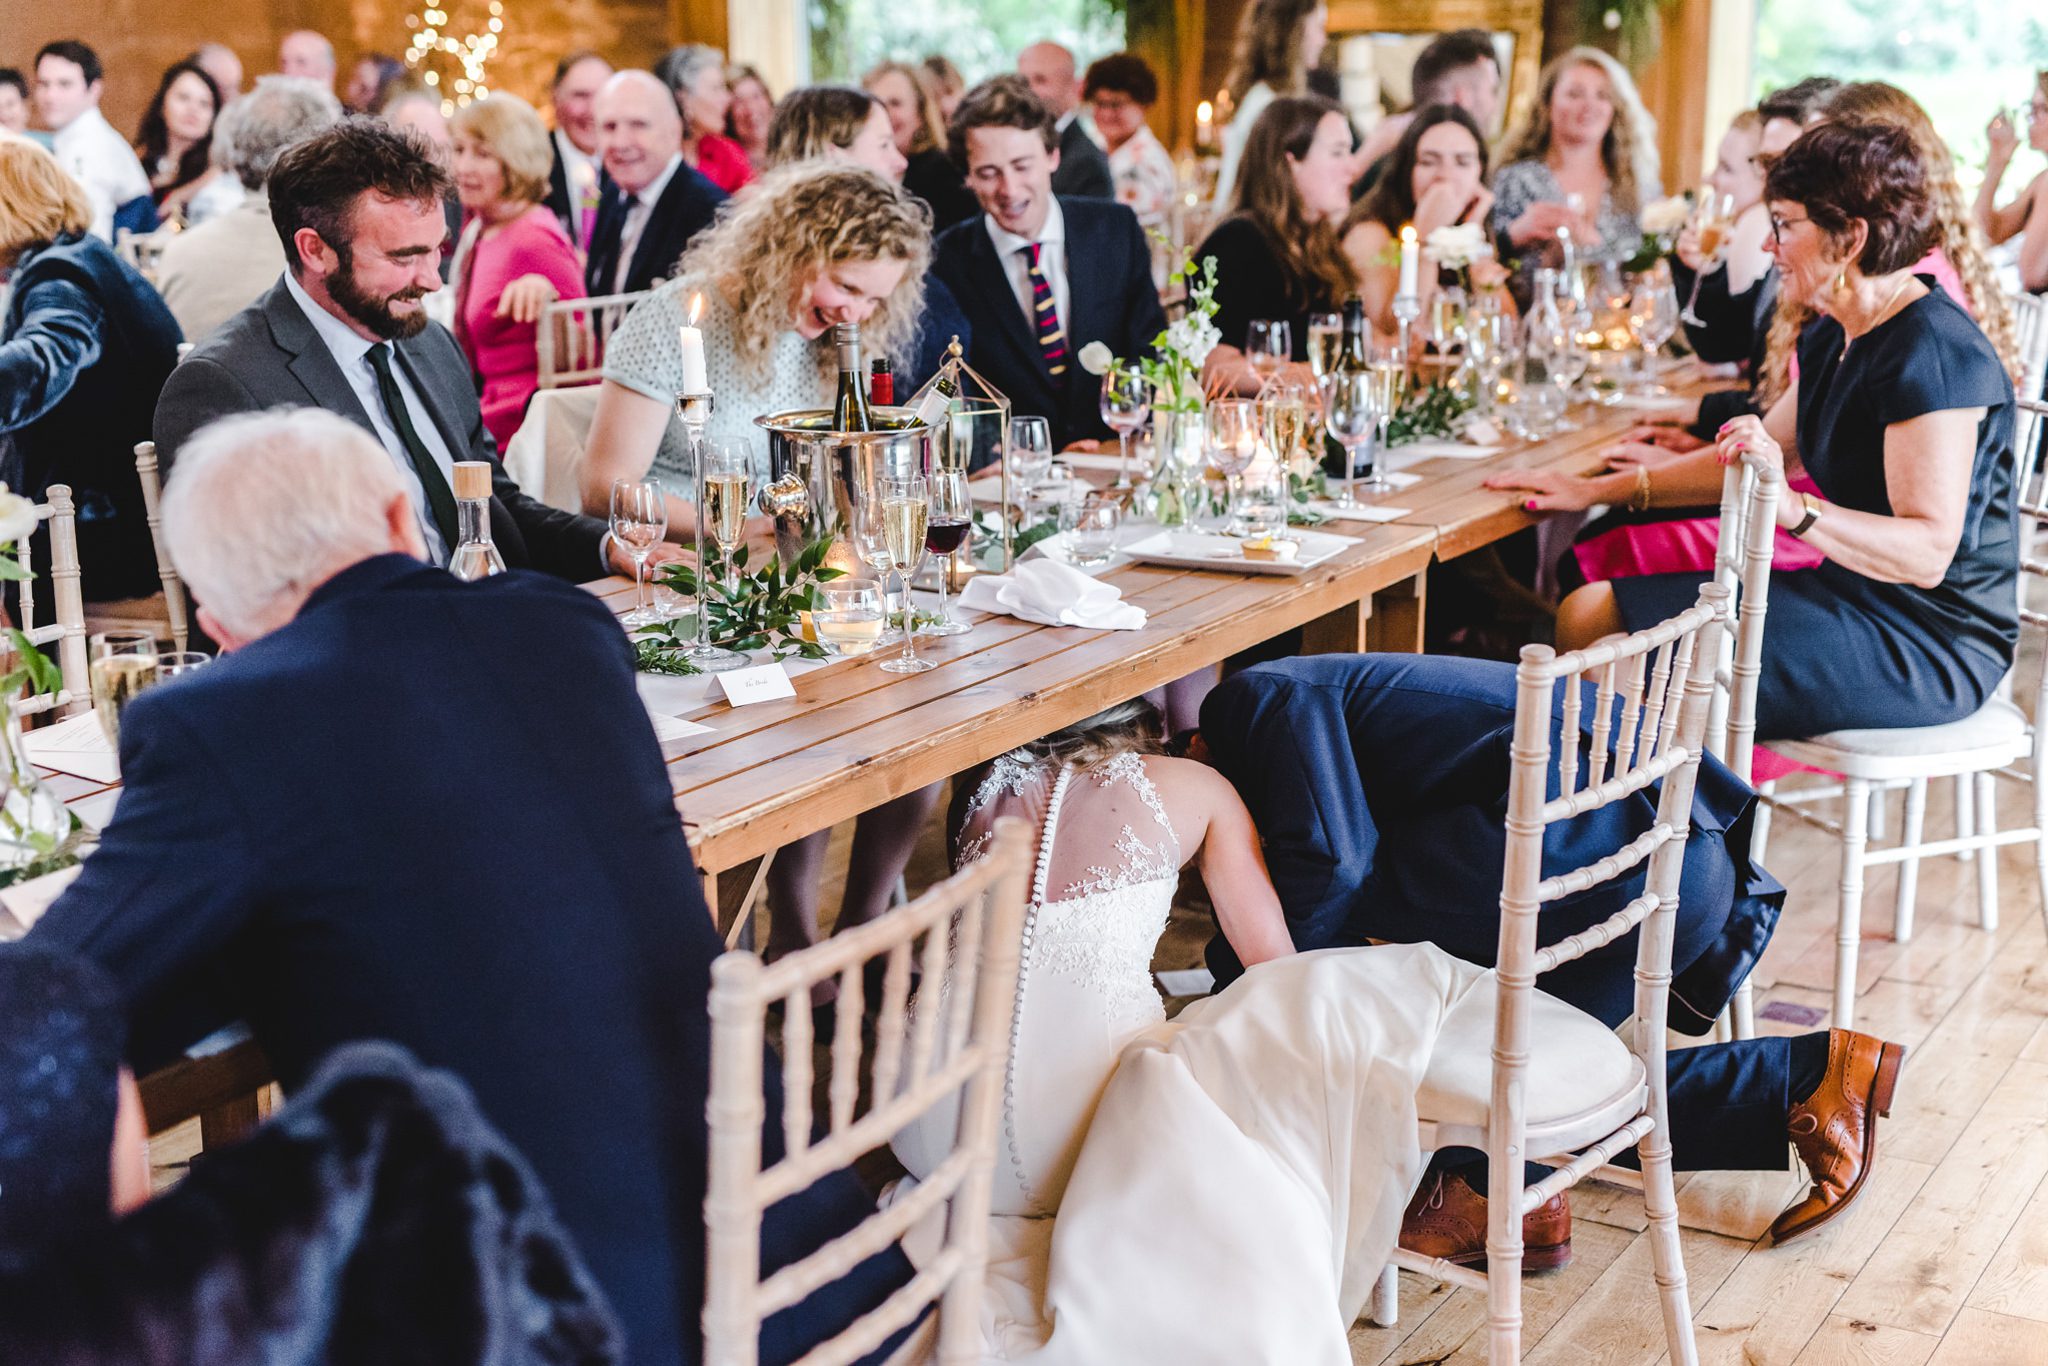 Danish wedding tradition of kissing under the table - Bigeye Photography